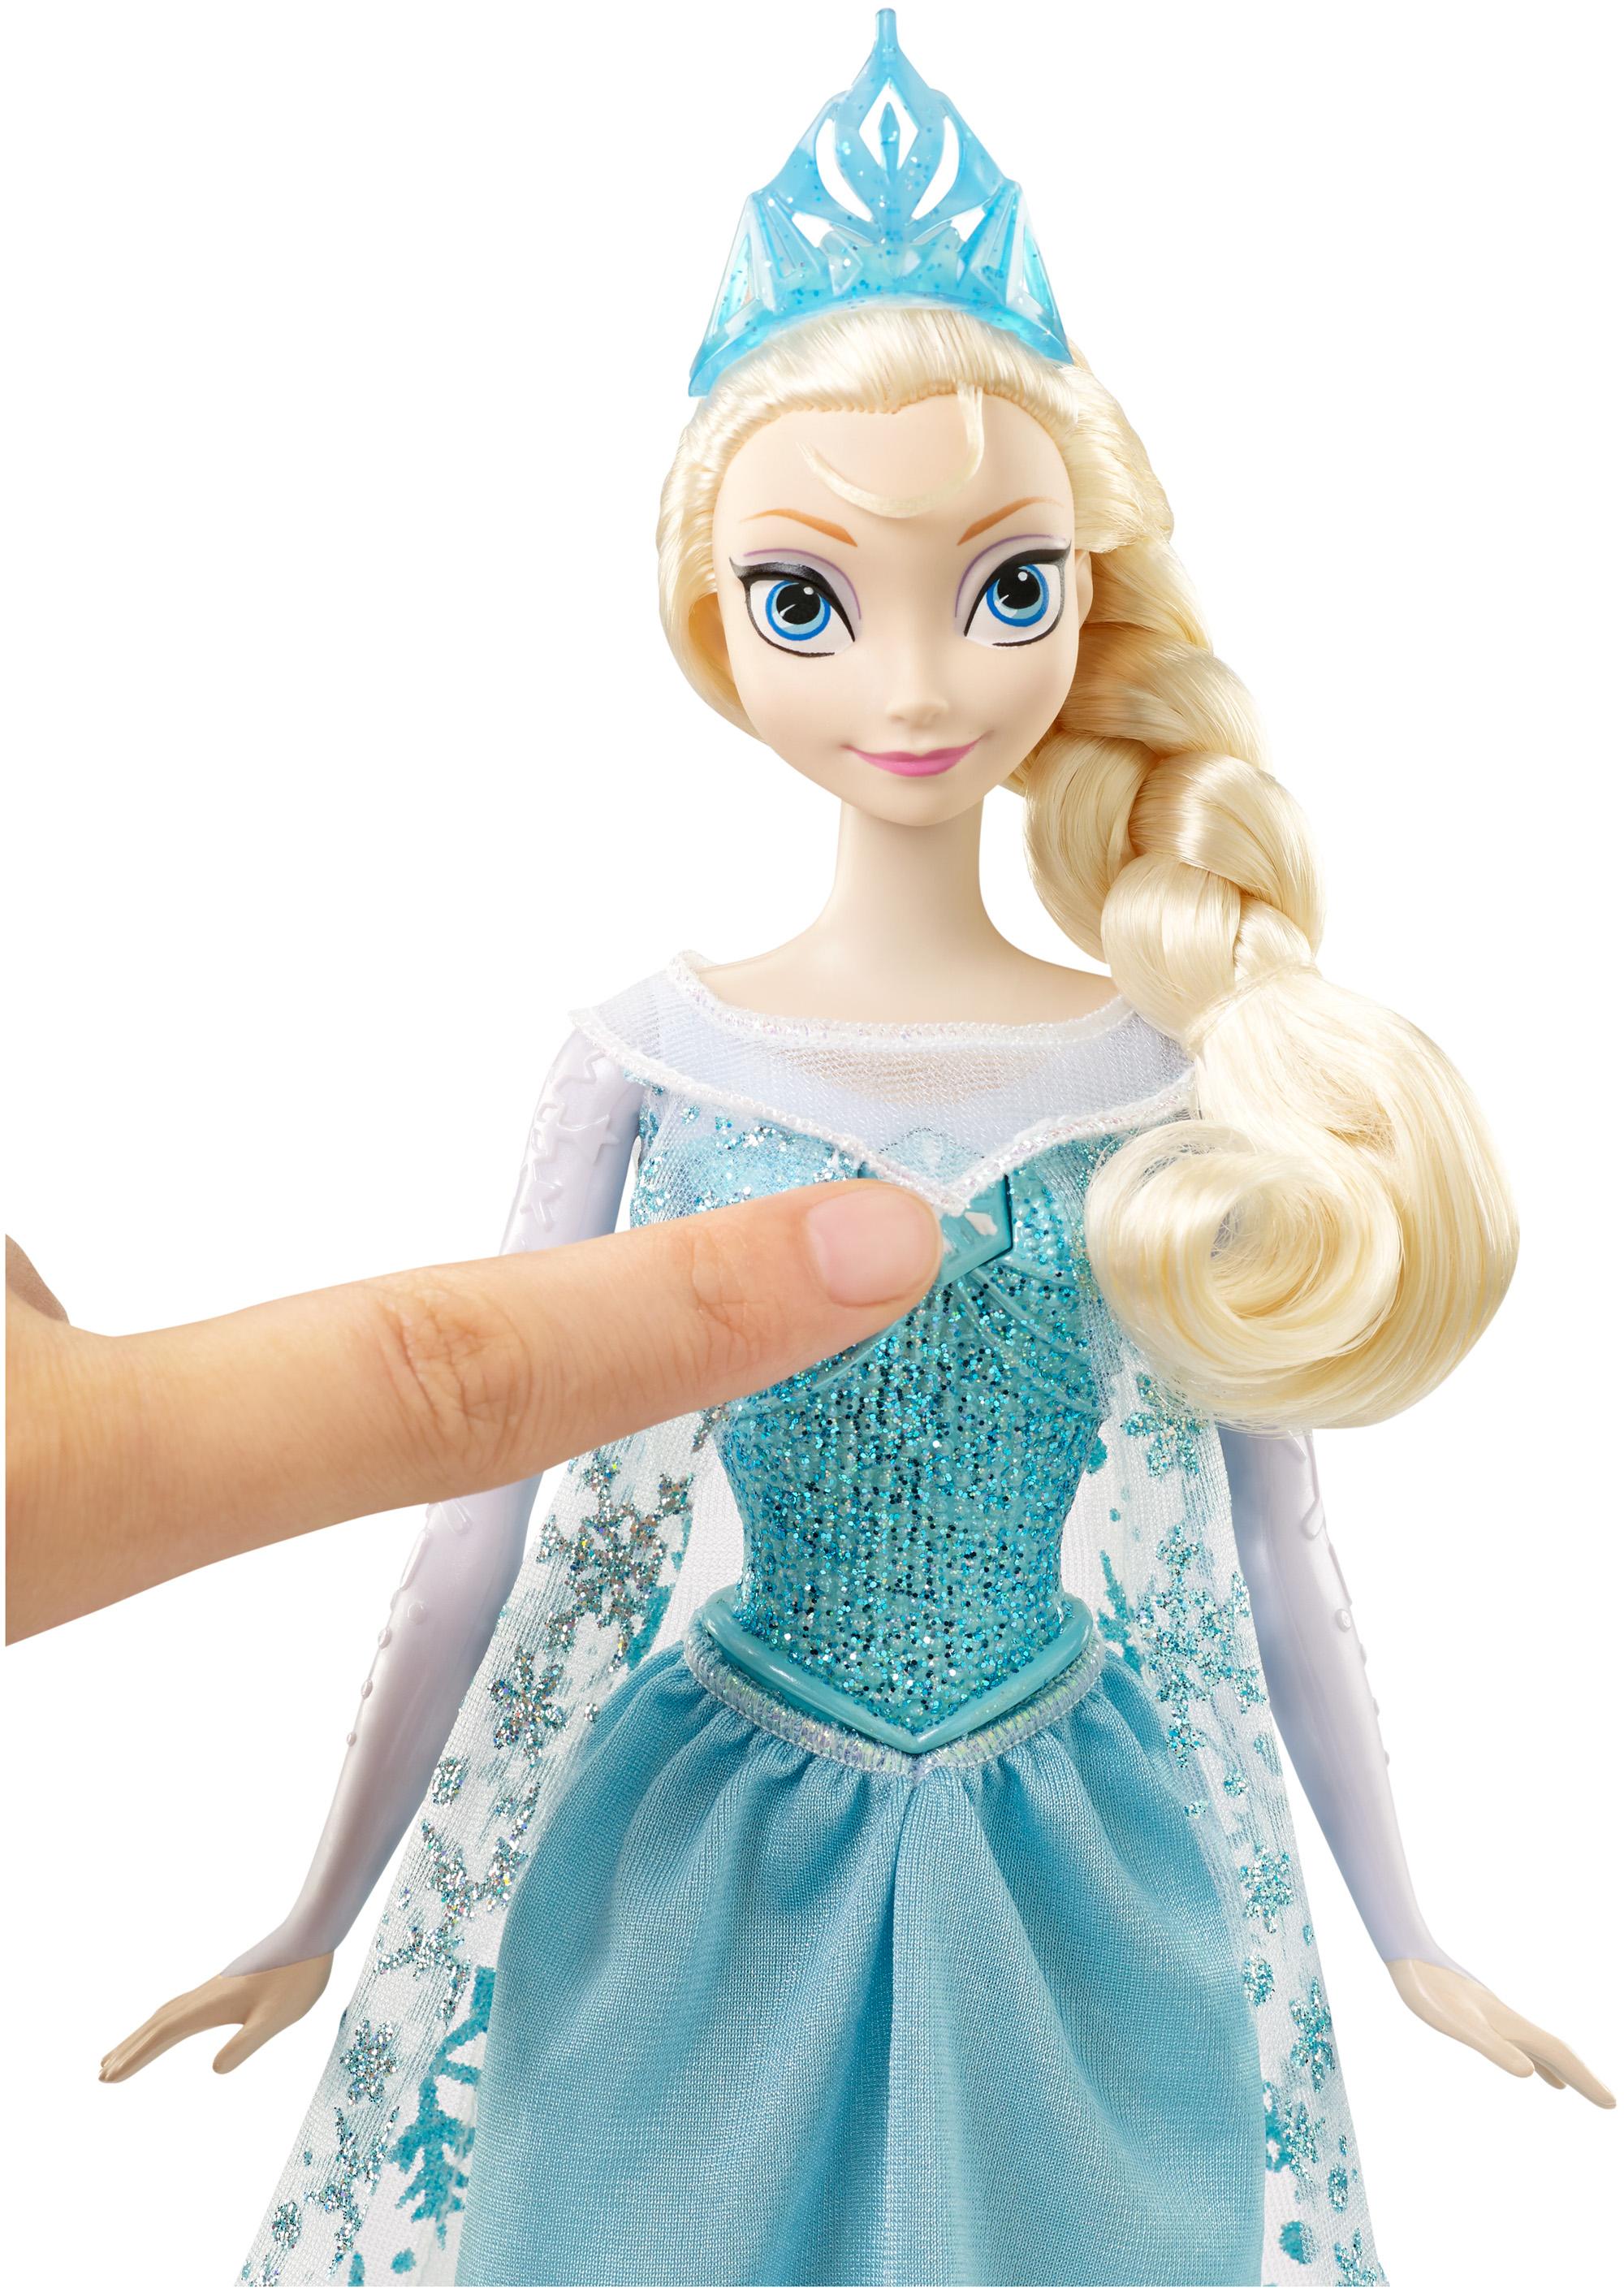 Buy Disney Frozen Singing Elsa Doll Online at Low Prices in India ...